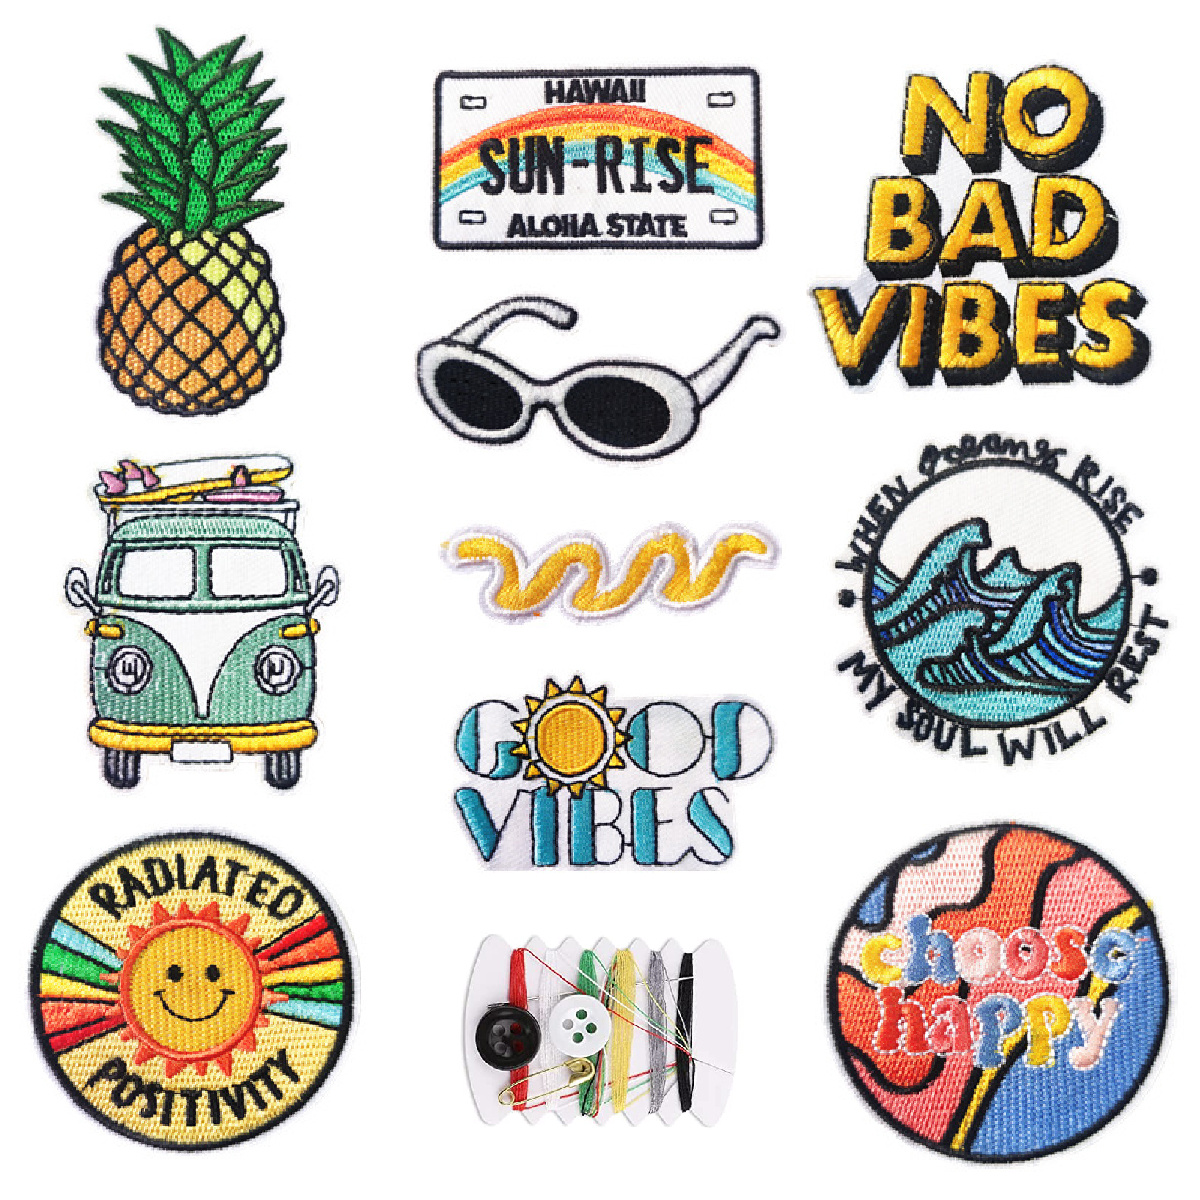 

10pcs Hippie Vintage Patches Diy Decal Stickers, Embroidery Applique Iron On Heat Patches For Jackets, Sew On Patches For Clothing Backpacks Jeans T-shirt